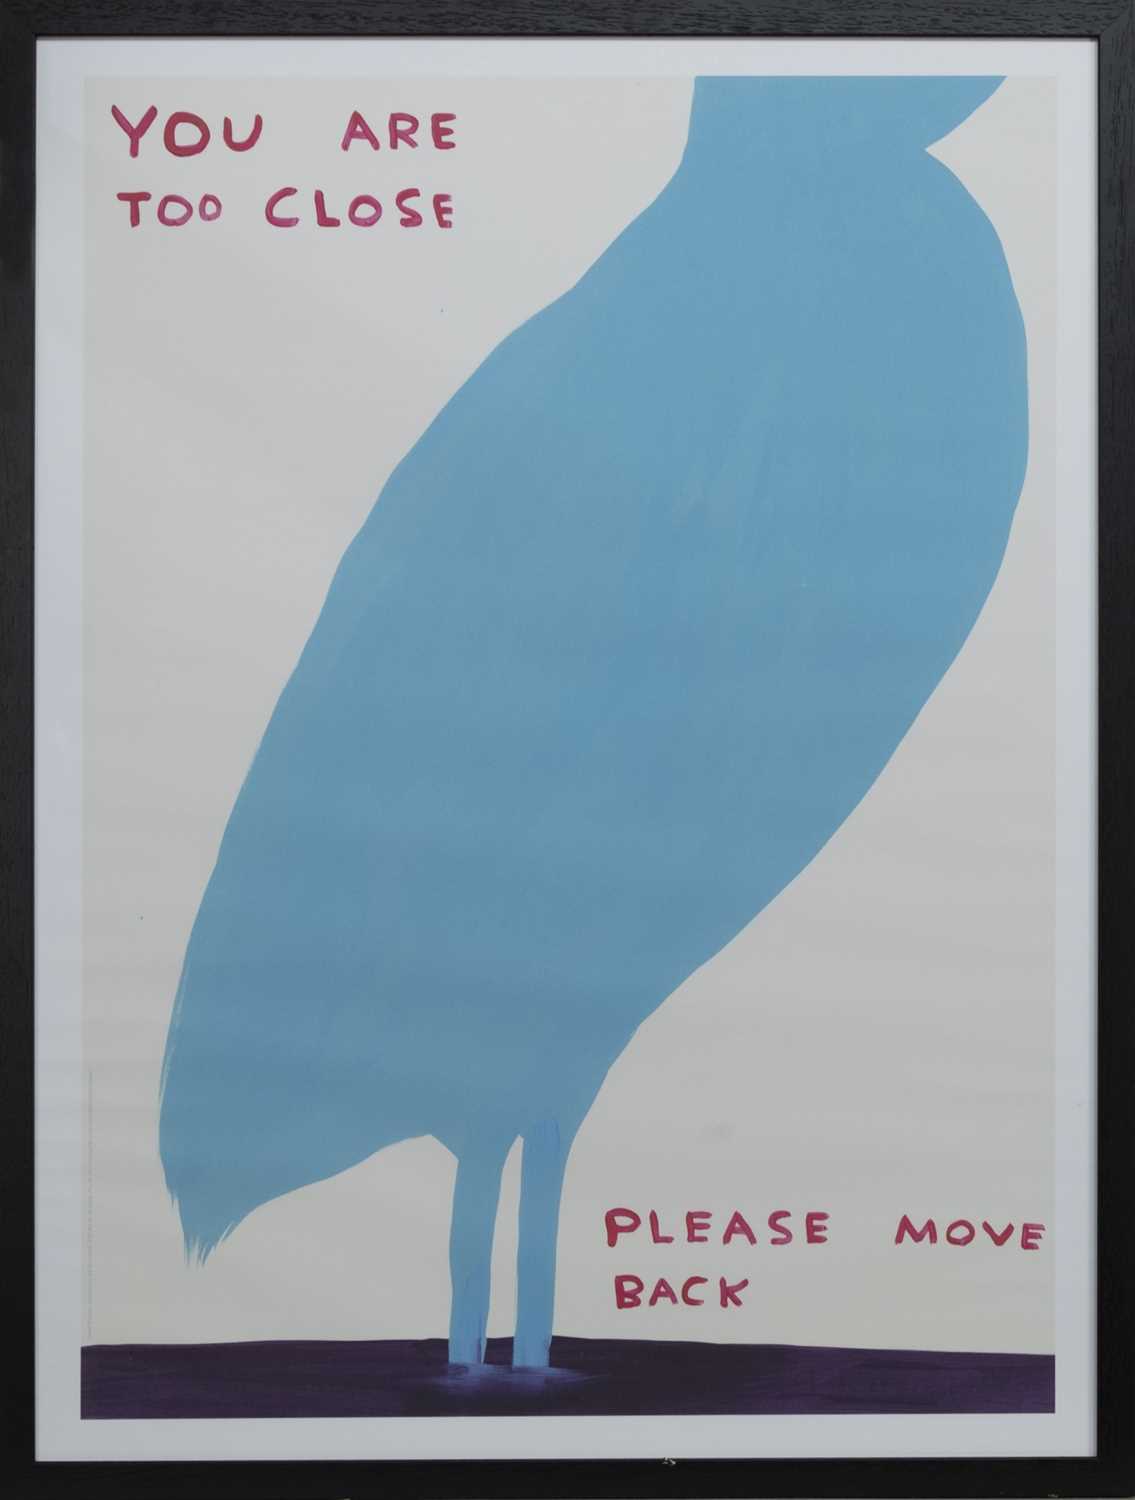 Lot 820 - YOU ARE TOO CLOSE,  A LITHOGRAPH BY DAVID SHRIGLEY